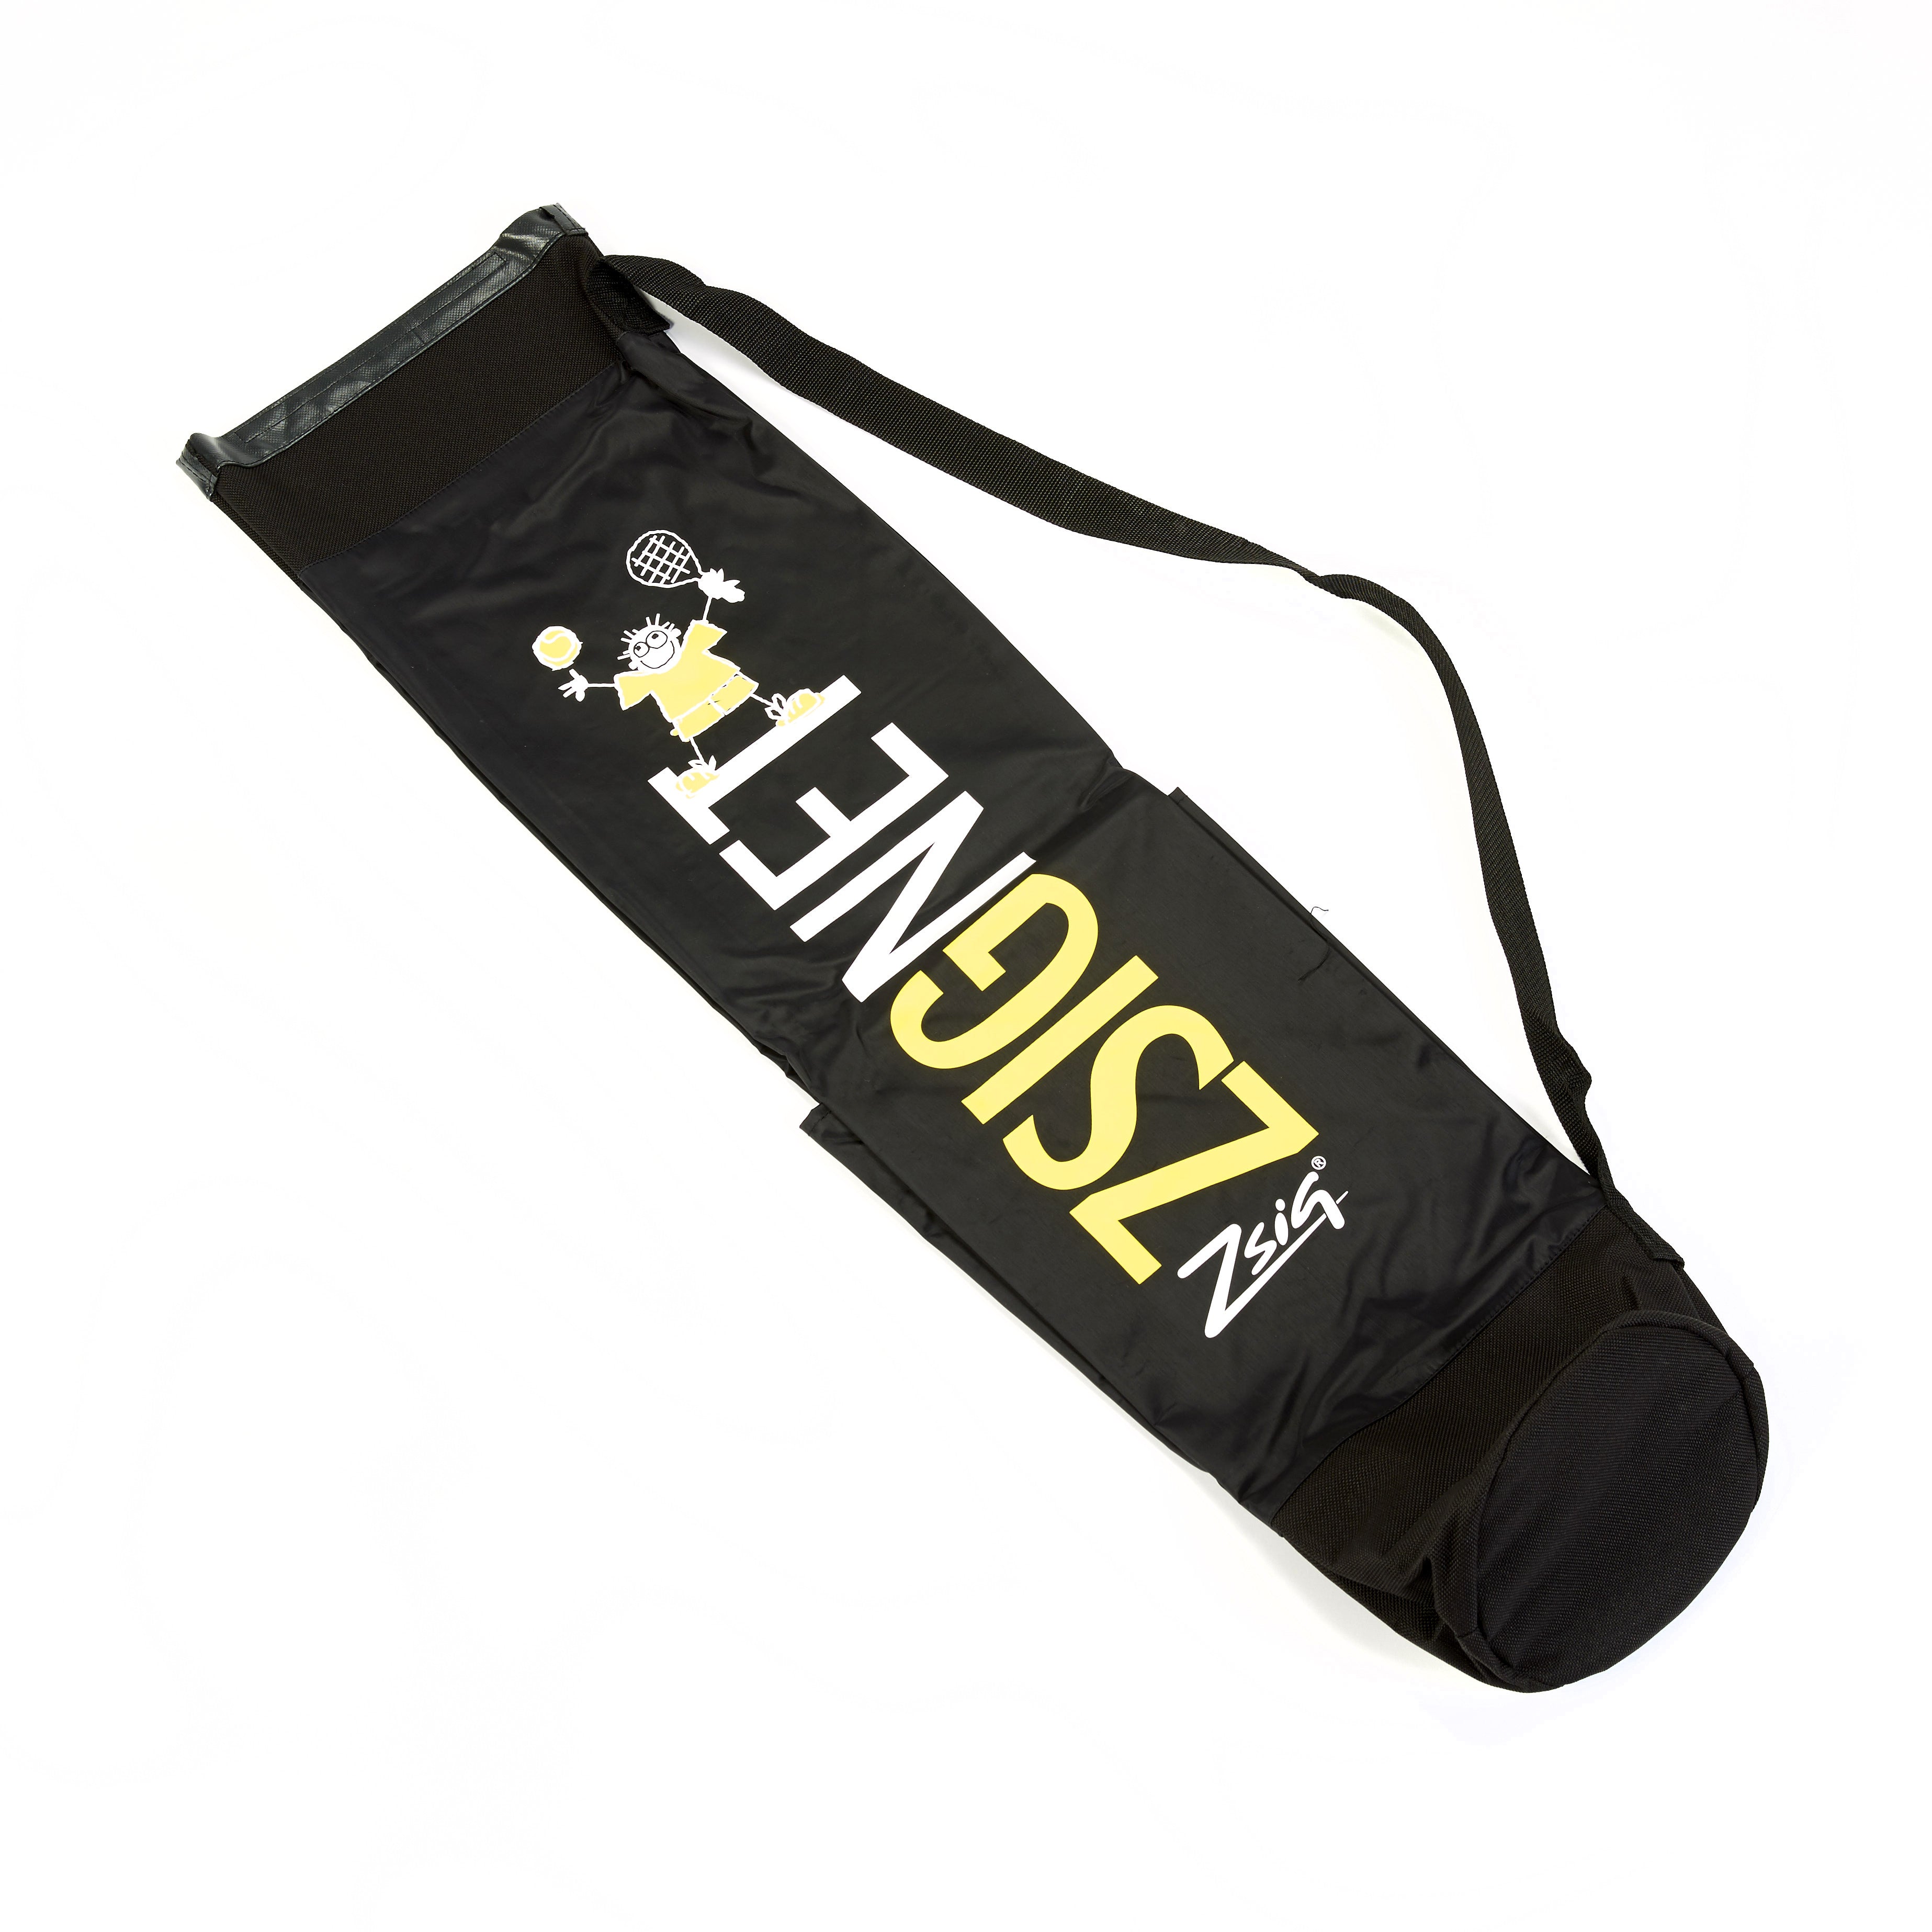 Footy Tennis shoulder bag easily carries the folded net and frame